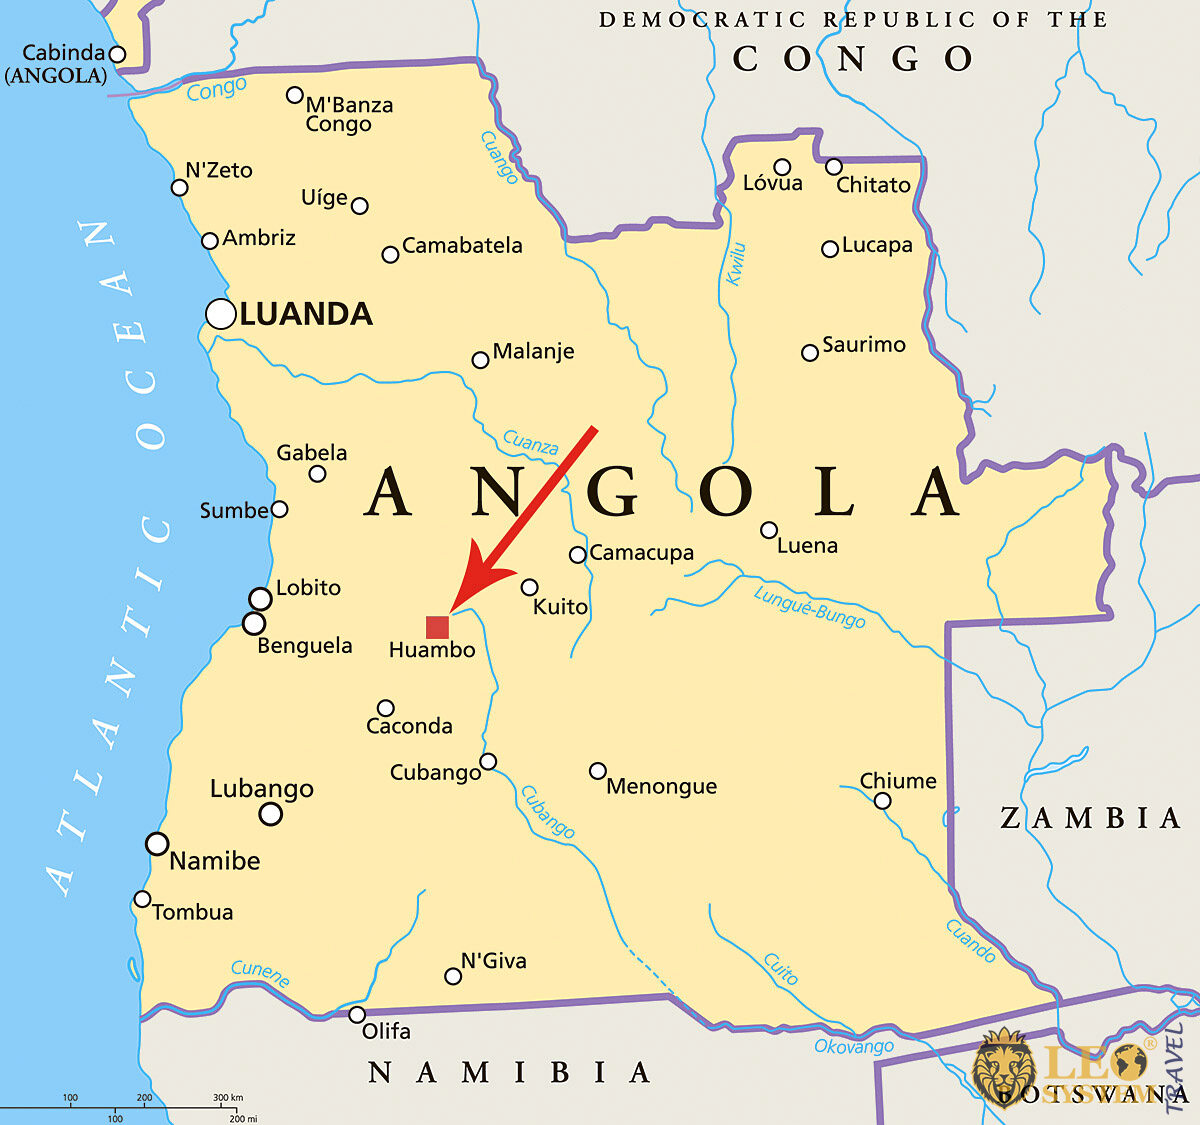 Image of a map showing the location of Huambo, Angola